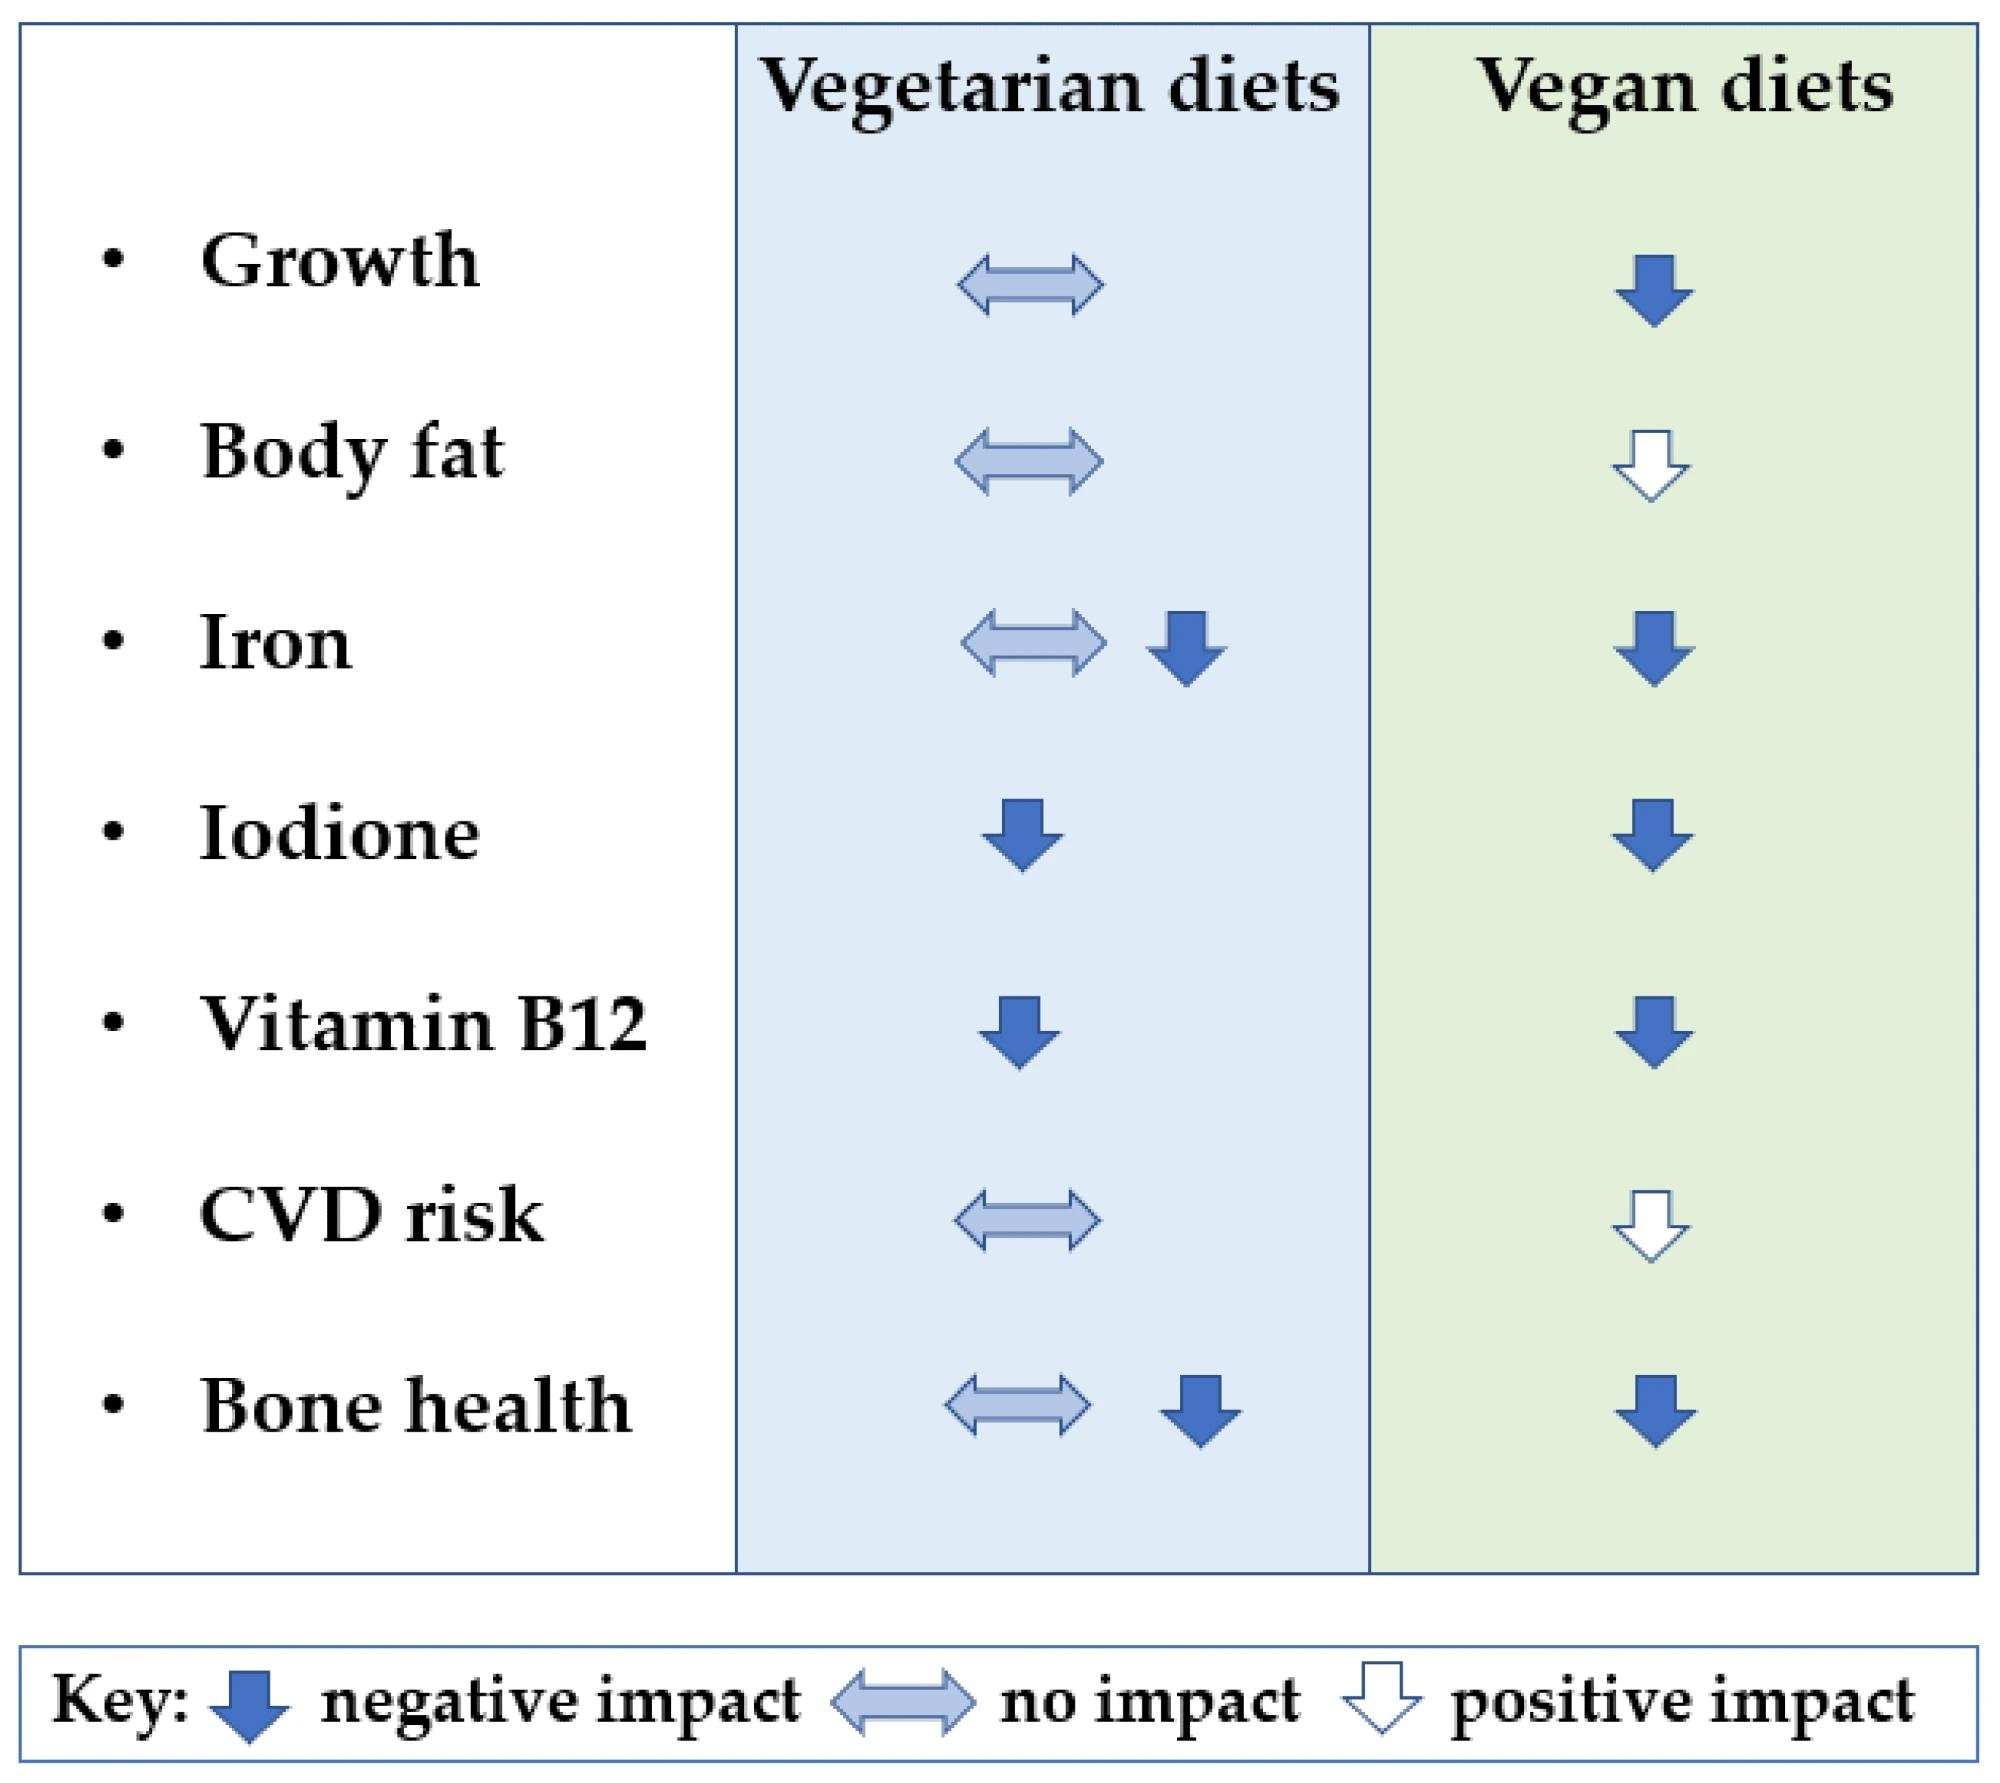 Summary of impacts of vegetarian and vegan diets on a range of children’s health outcomes